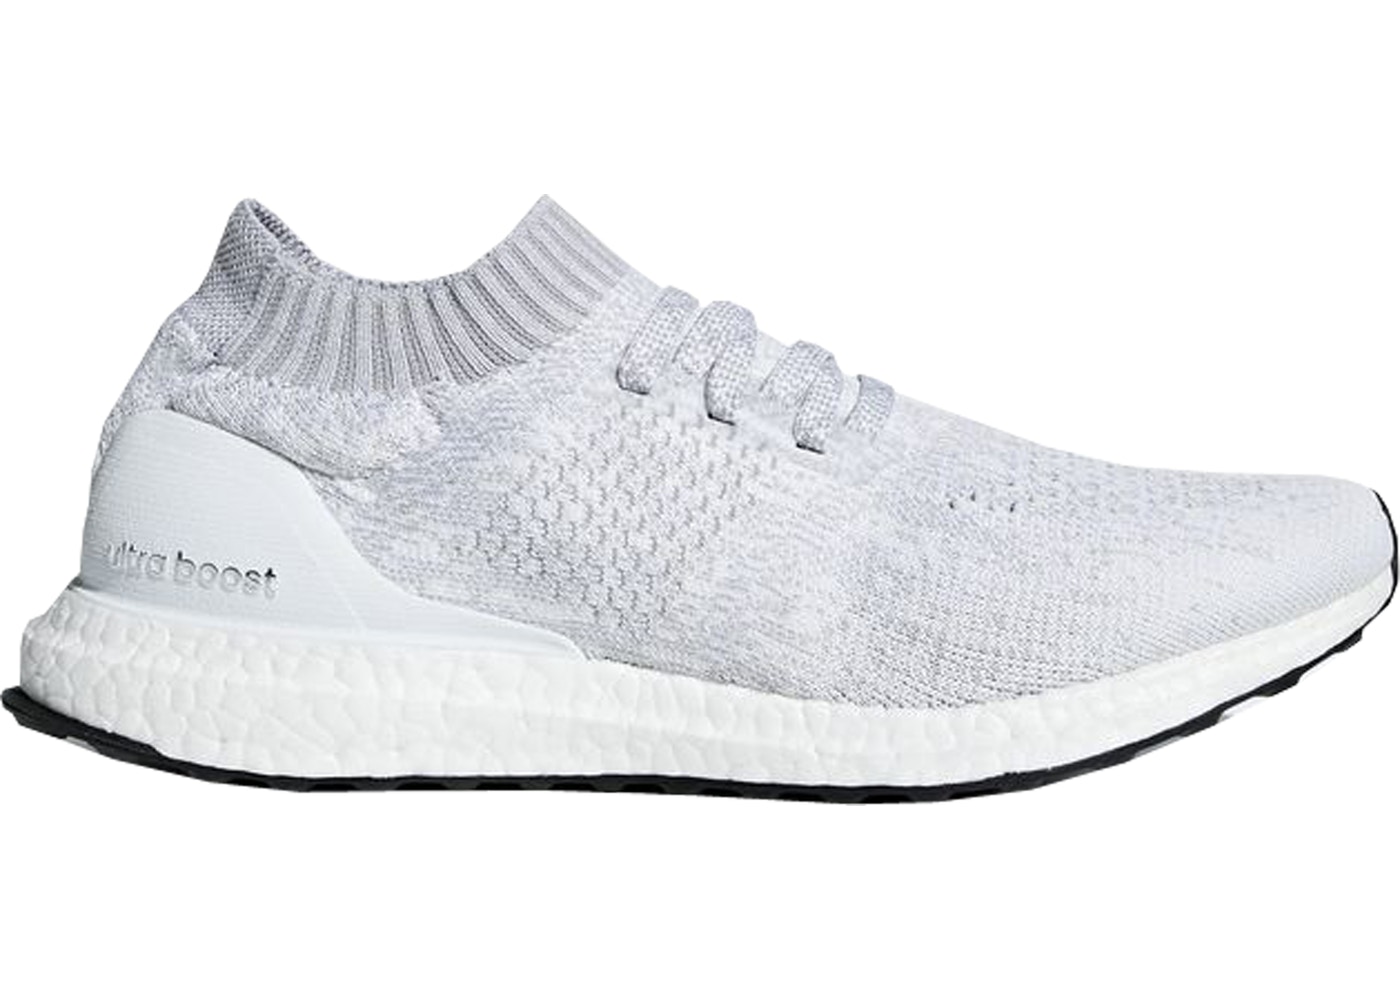 adidas ultra boost uncaged 4.0